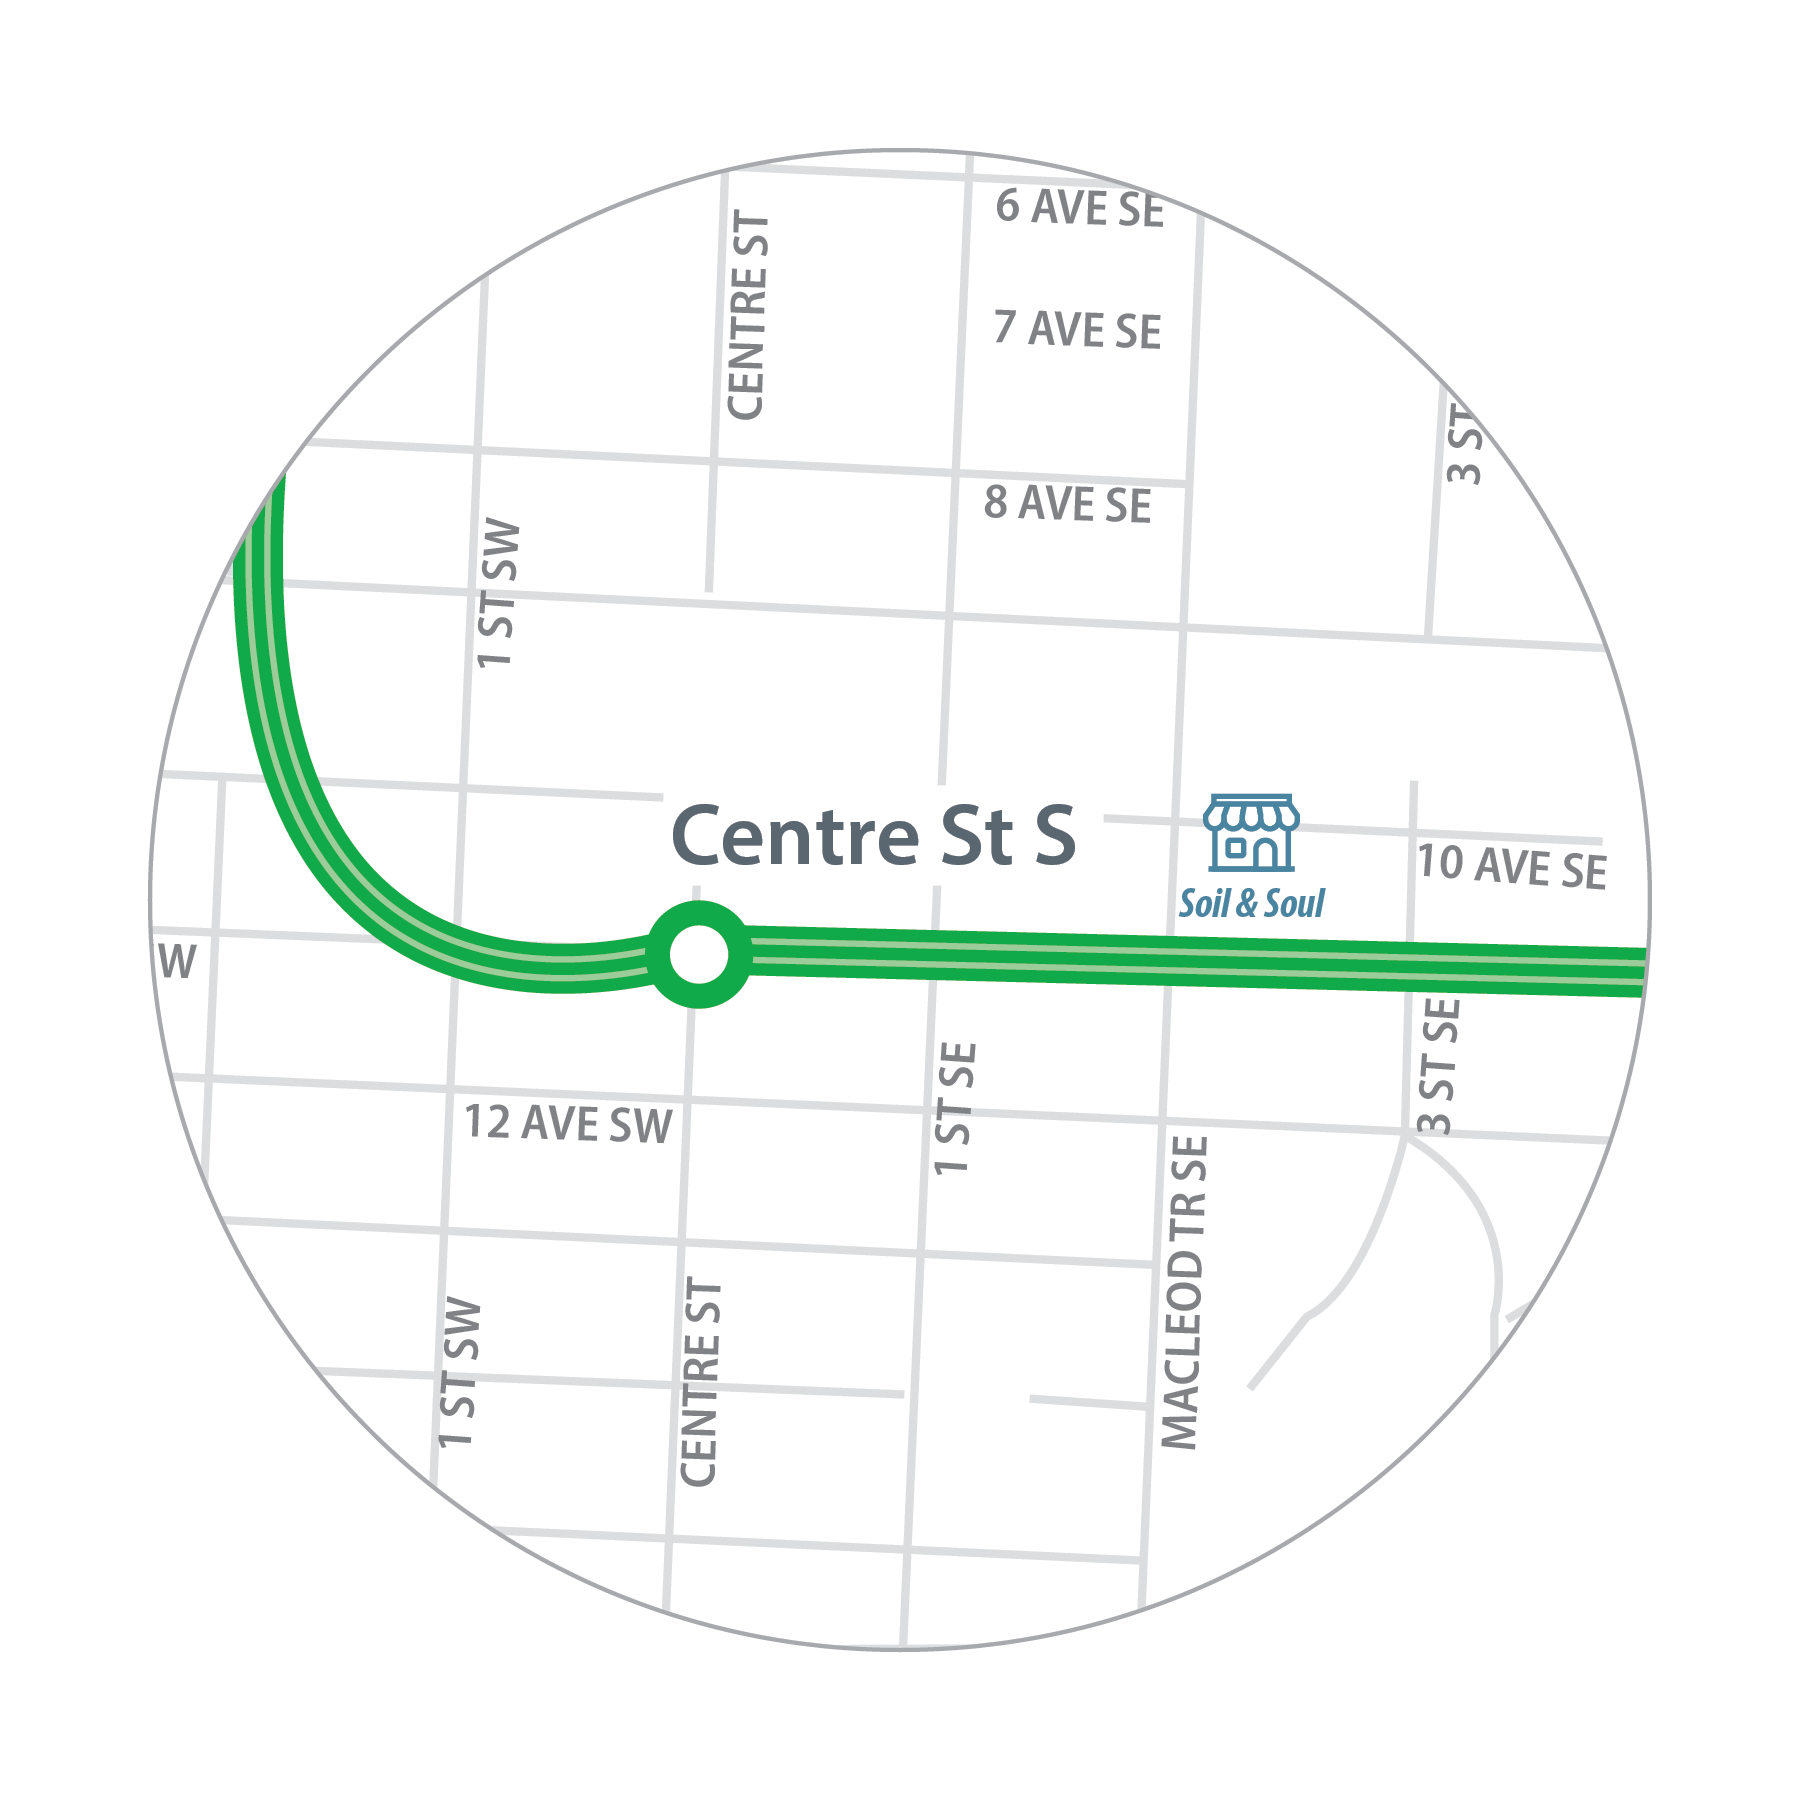 Map of Soil and Soul location in relation to Centre Street S. Station.